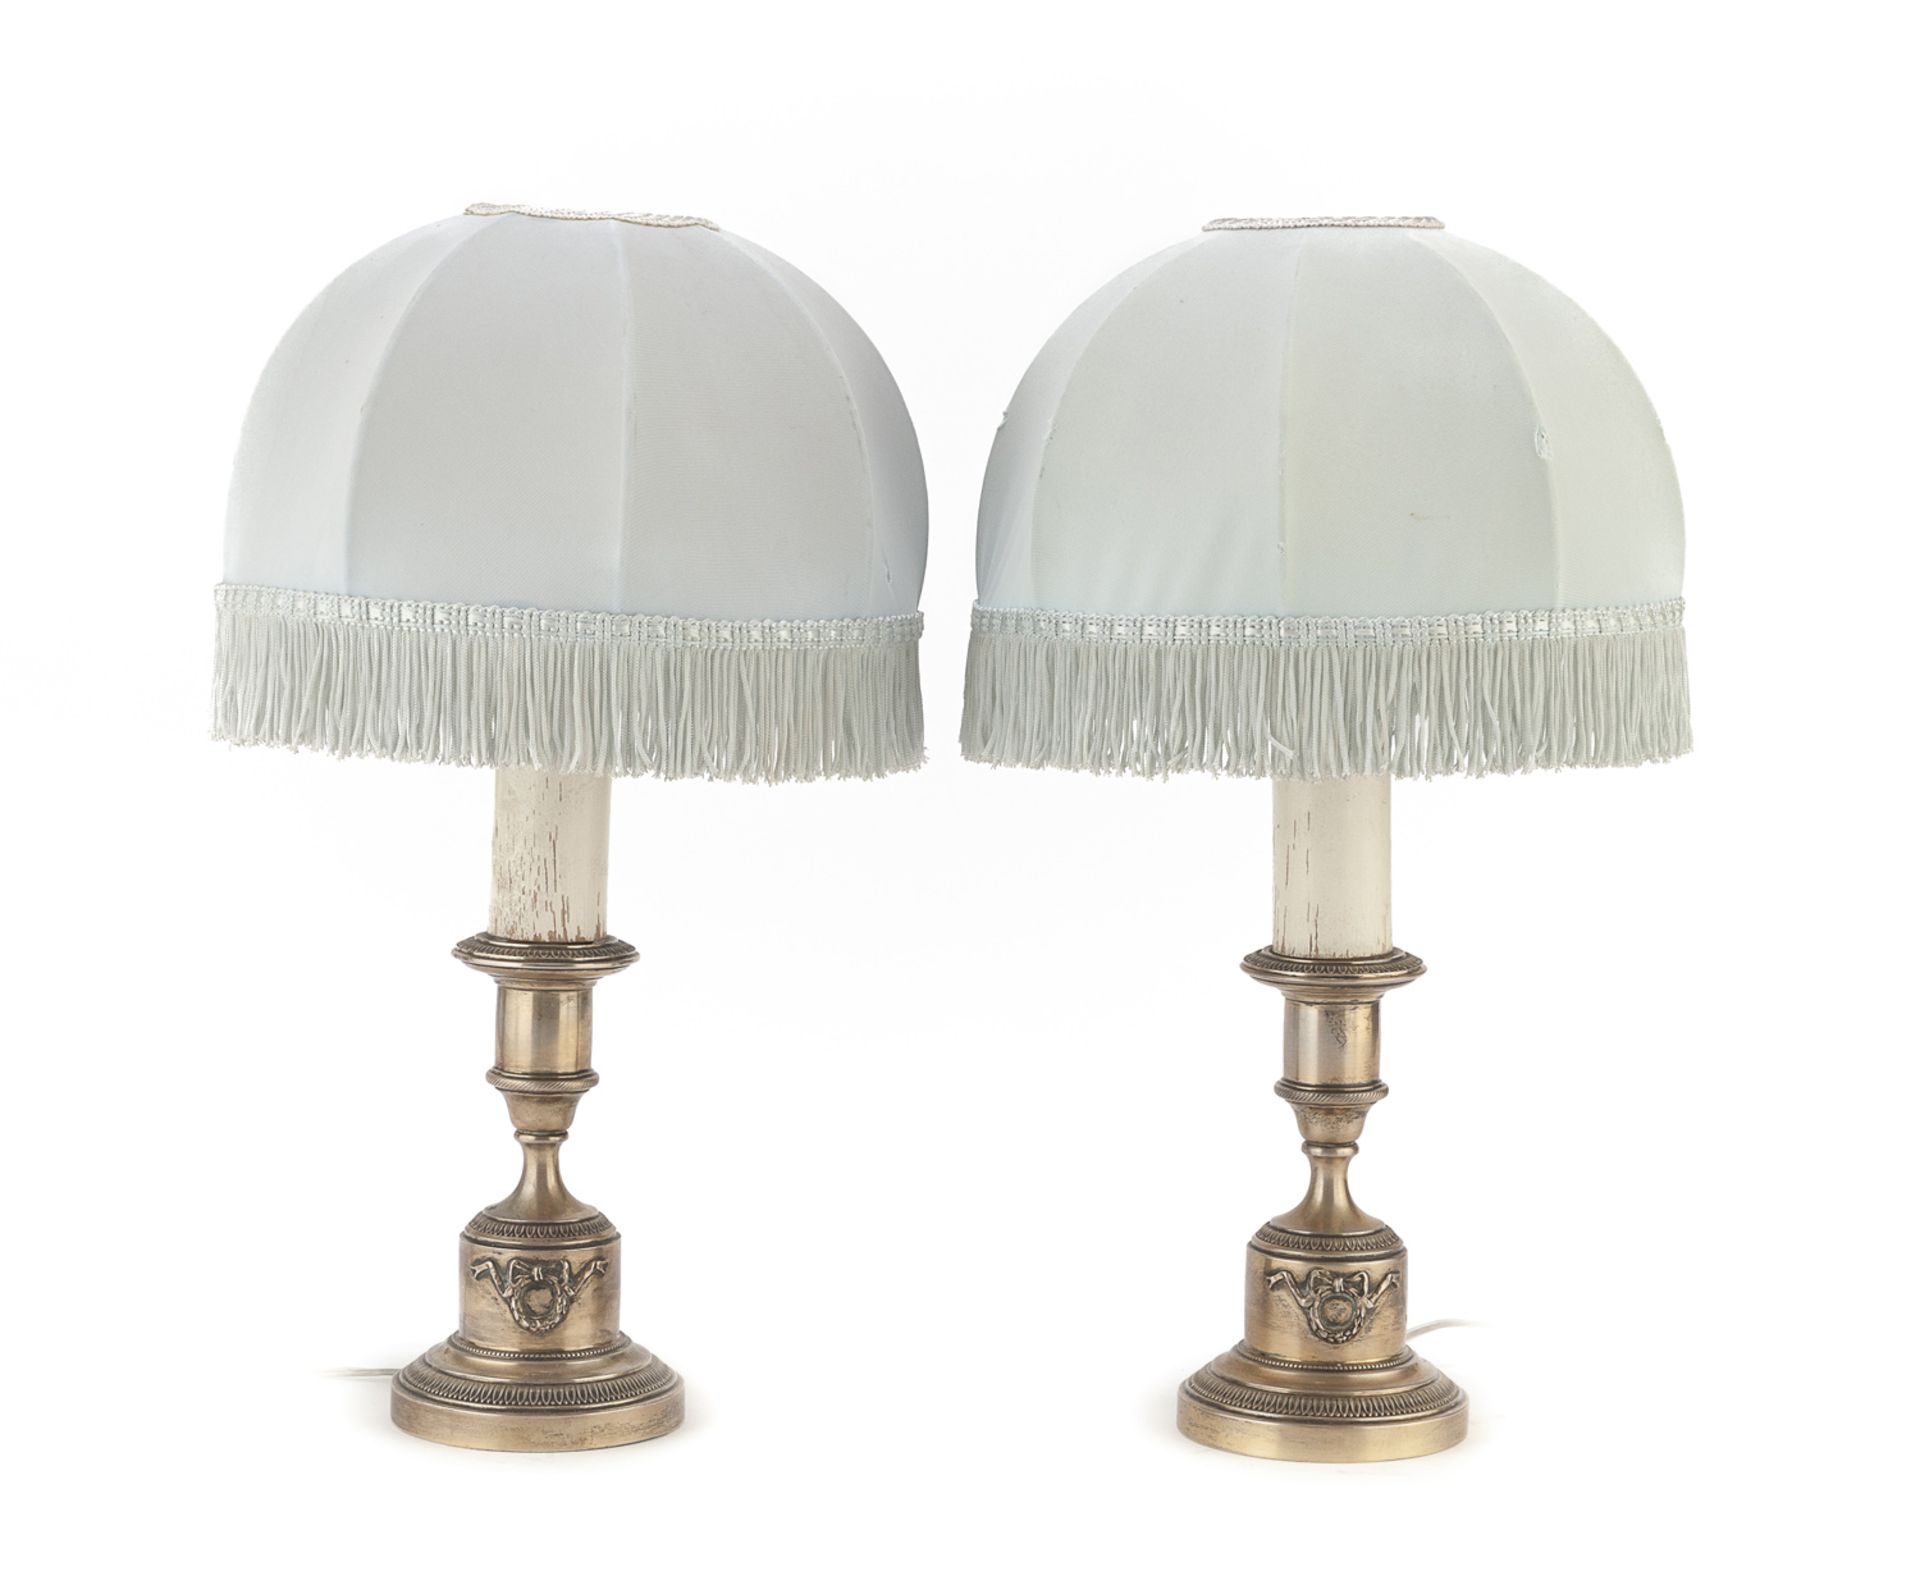 PAIR OF SILVER LAMPS ITALY 20th CENTURY